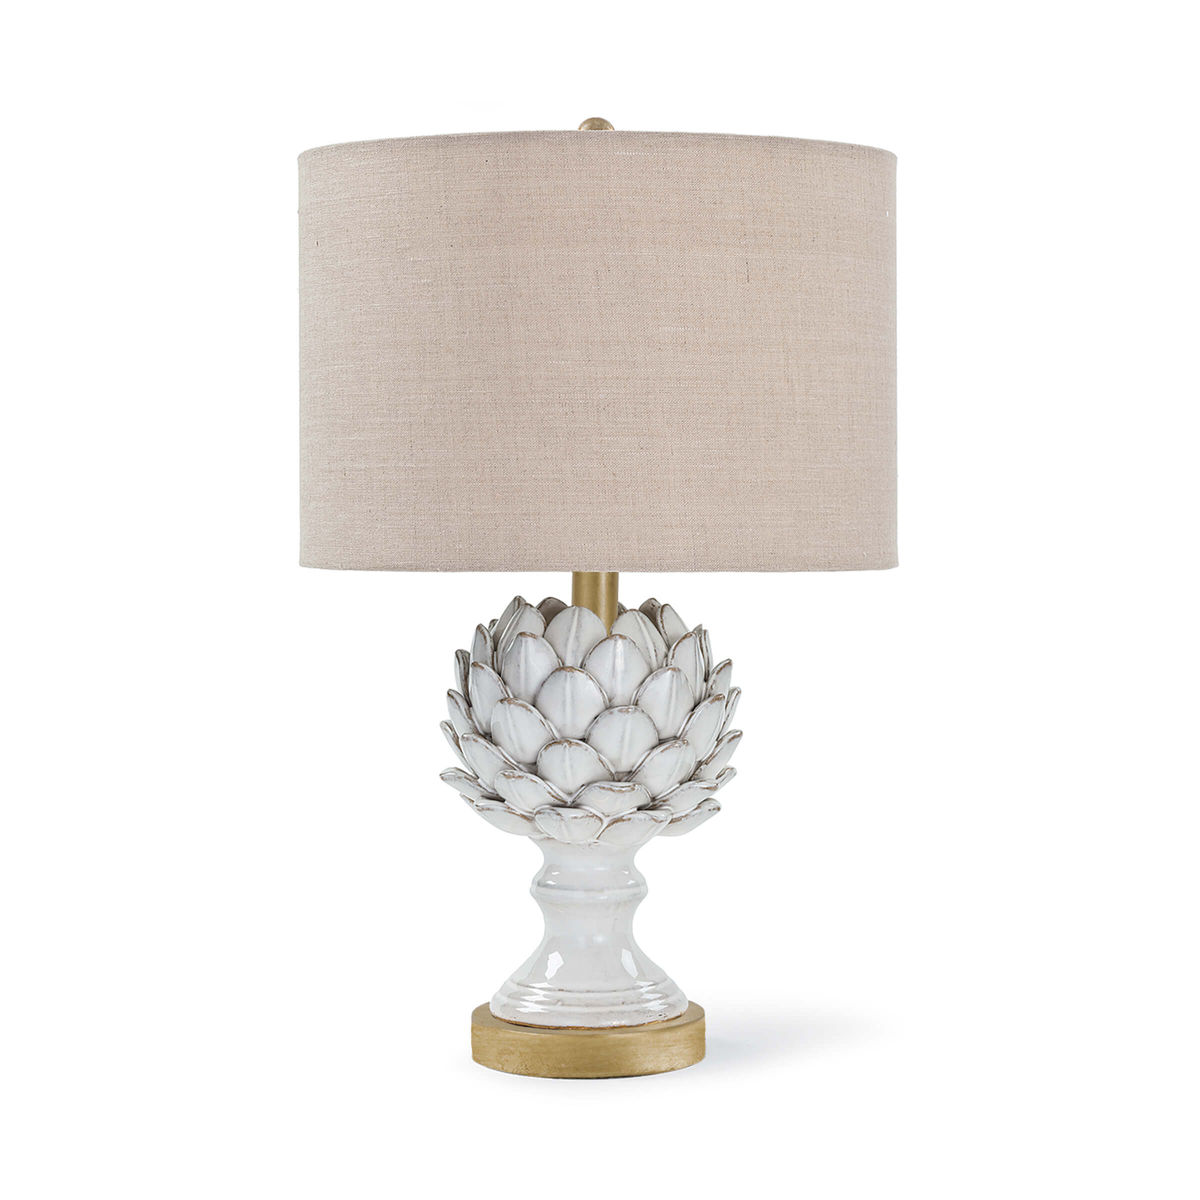 Shop Artichoke Ceramic Table Lamp (Off White) from Peggy Haddad Interiors Home on Openhaus